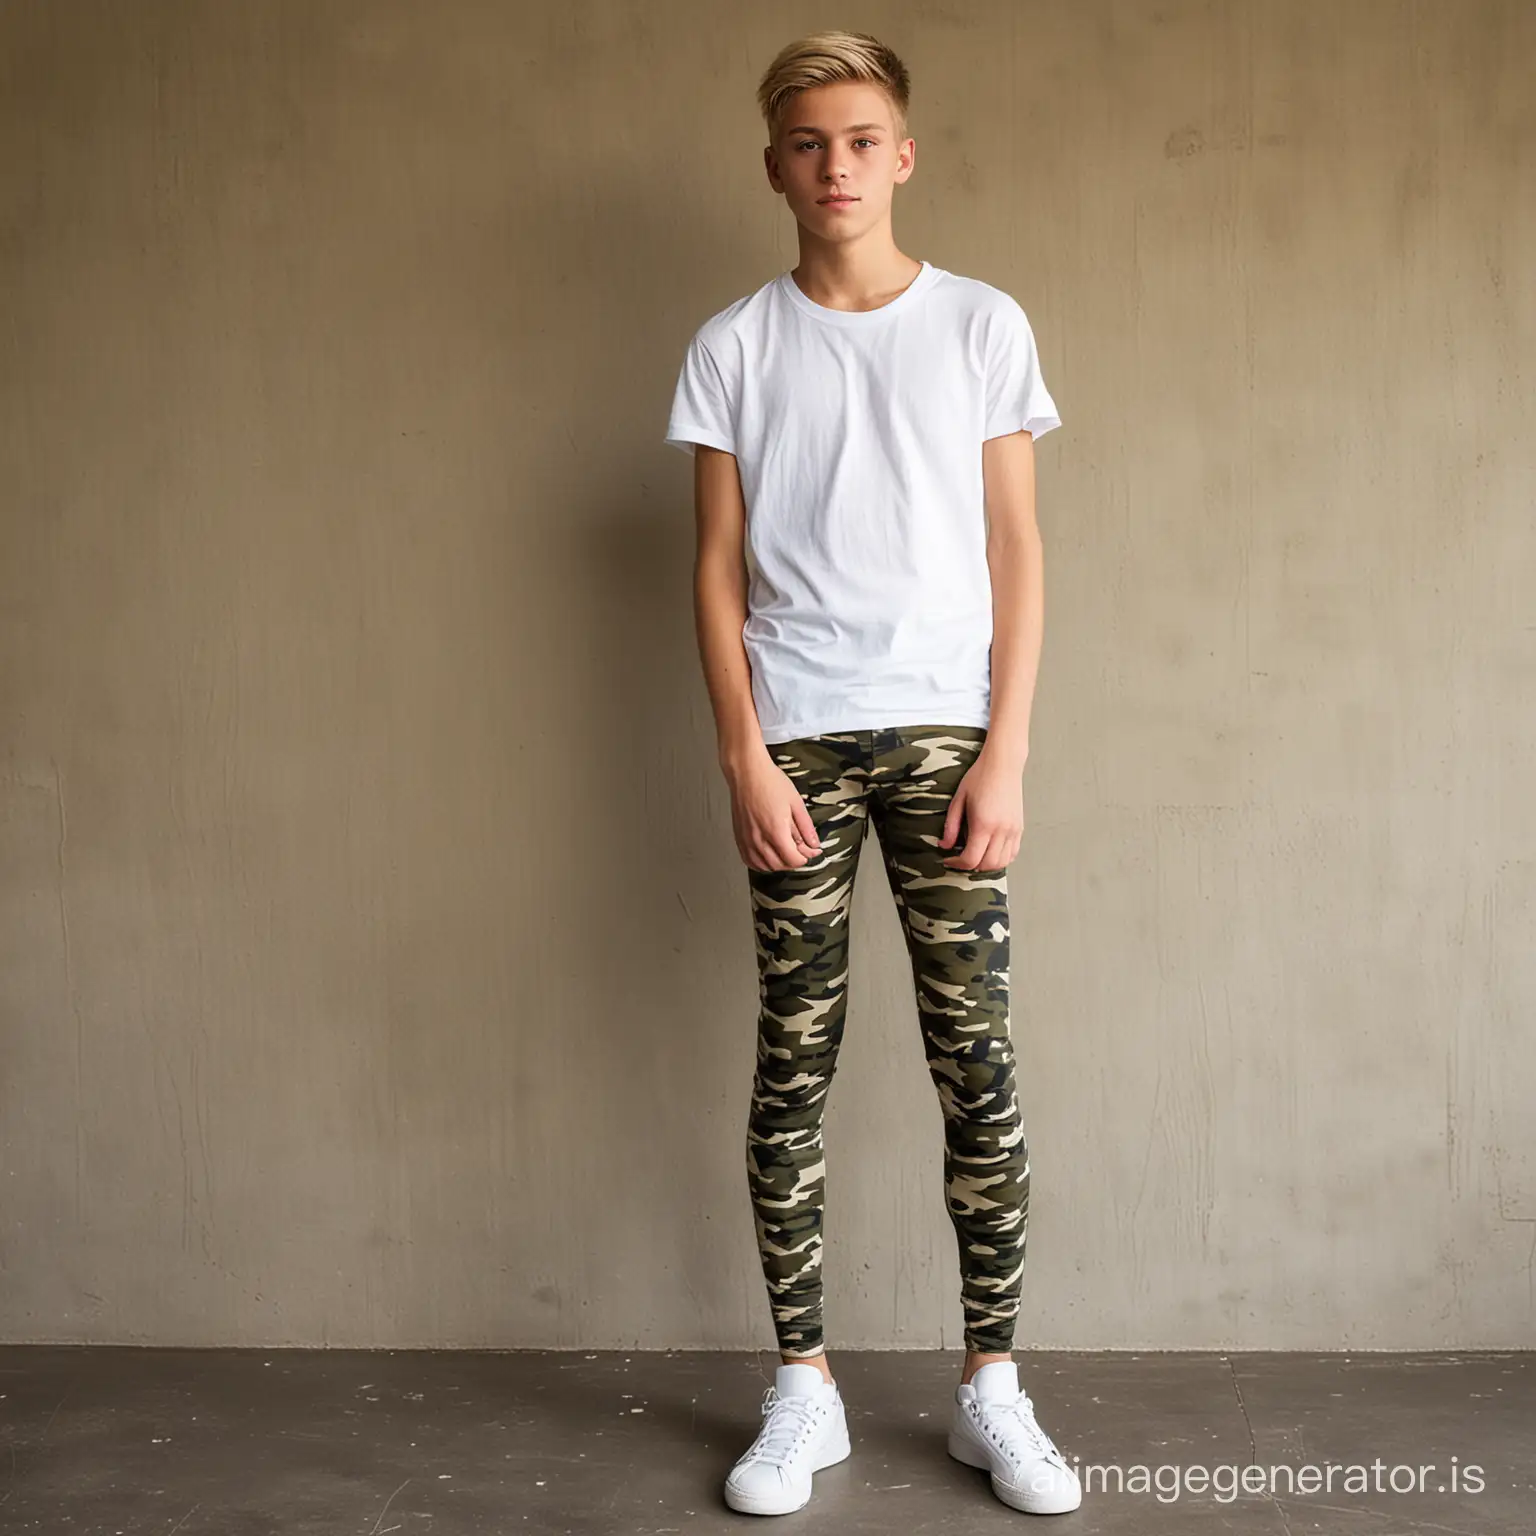 Skinny-Blonde-Boy-in-Camouflage-Tights-and-White-TShirt